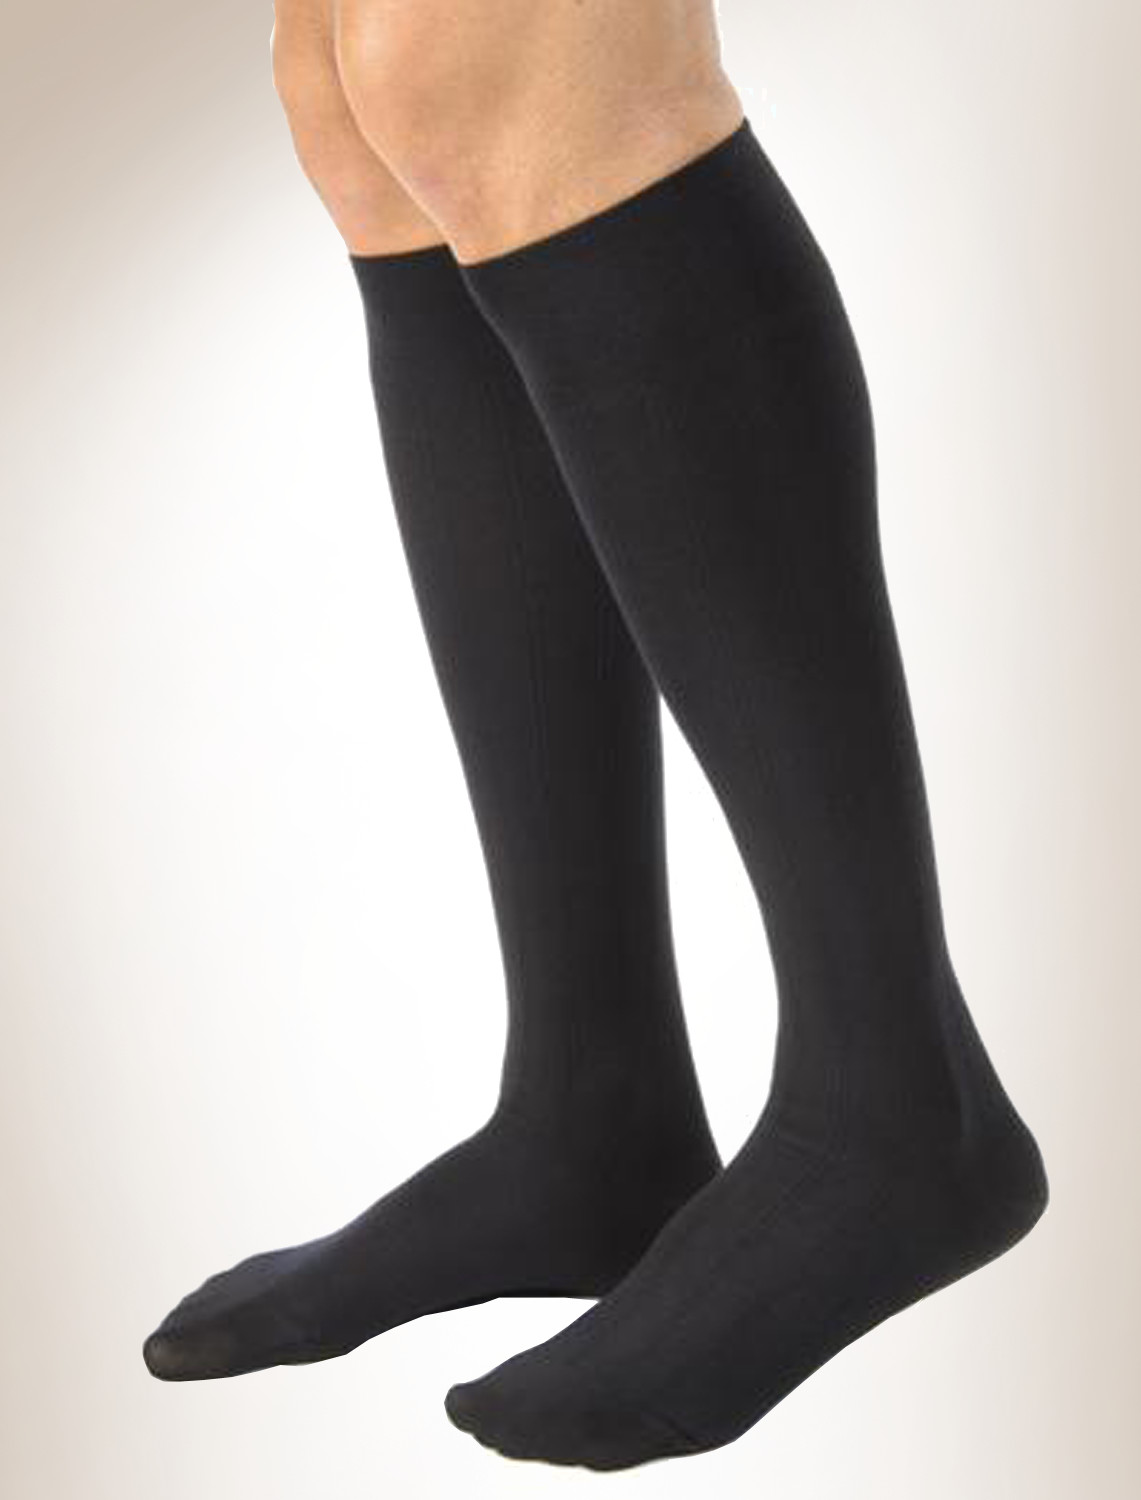 Jobst for Men Casual 20-30 mmHg* Knee-High Compression Stockings | eBay